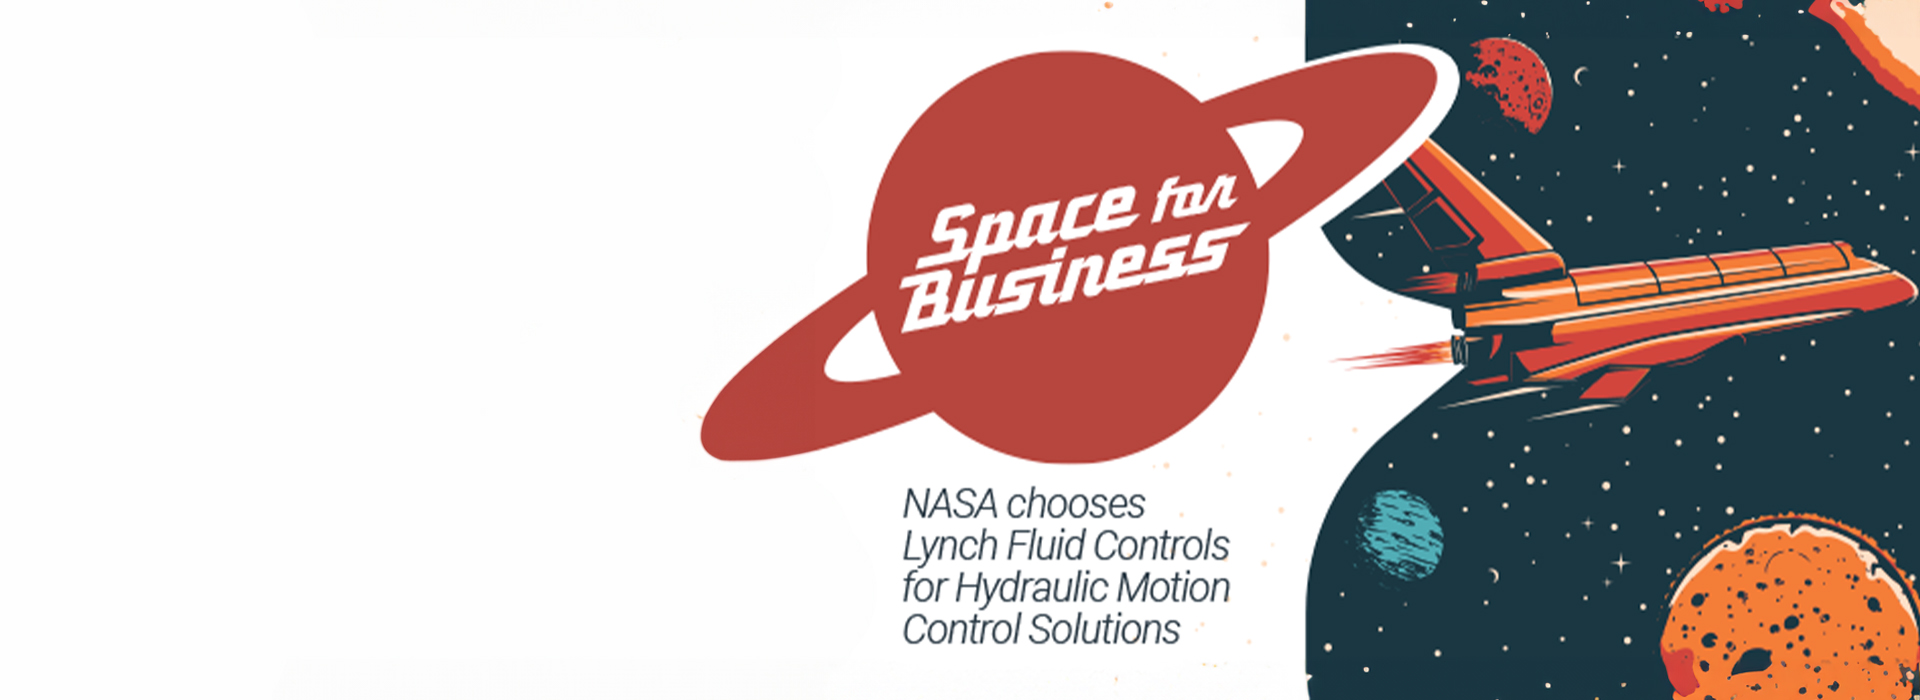 Space-for-Business-NASA-chooses-Lynch-Fluid-Controls-for-Hydraulic-Motion-Control-Solutions